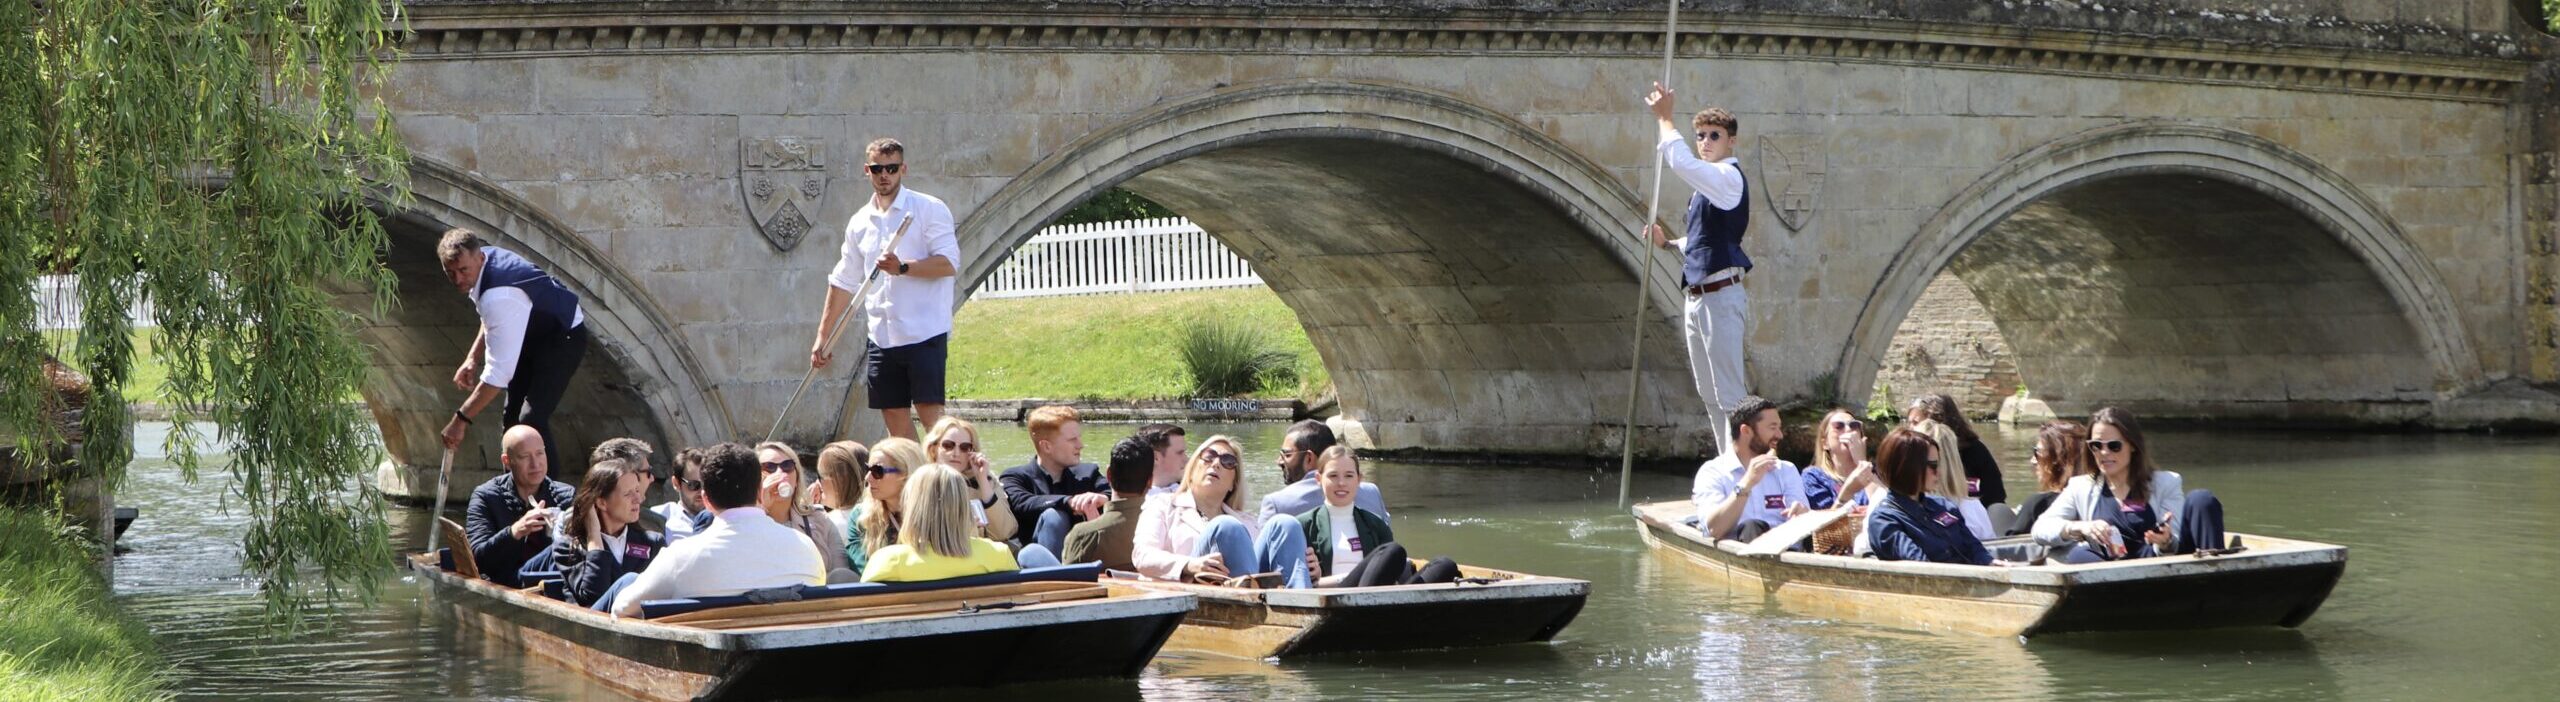 Hen Party Punting